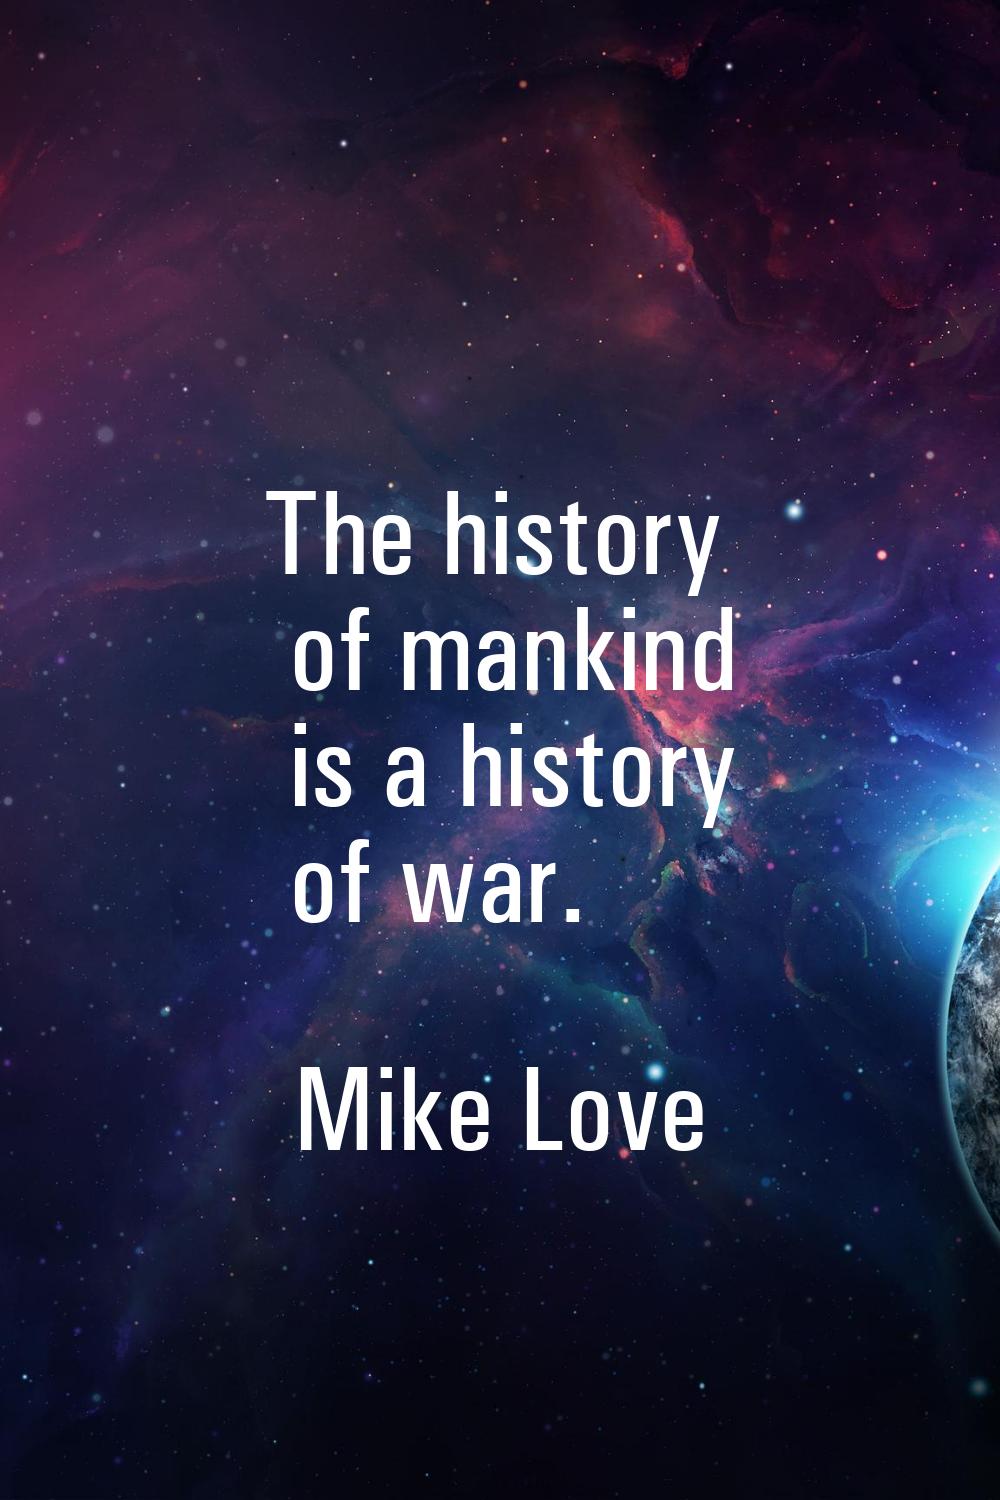 The history of mankind is a history of war.